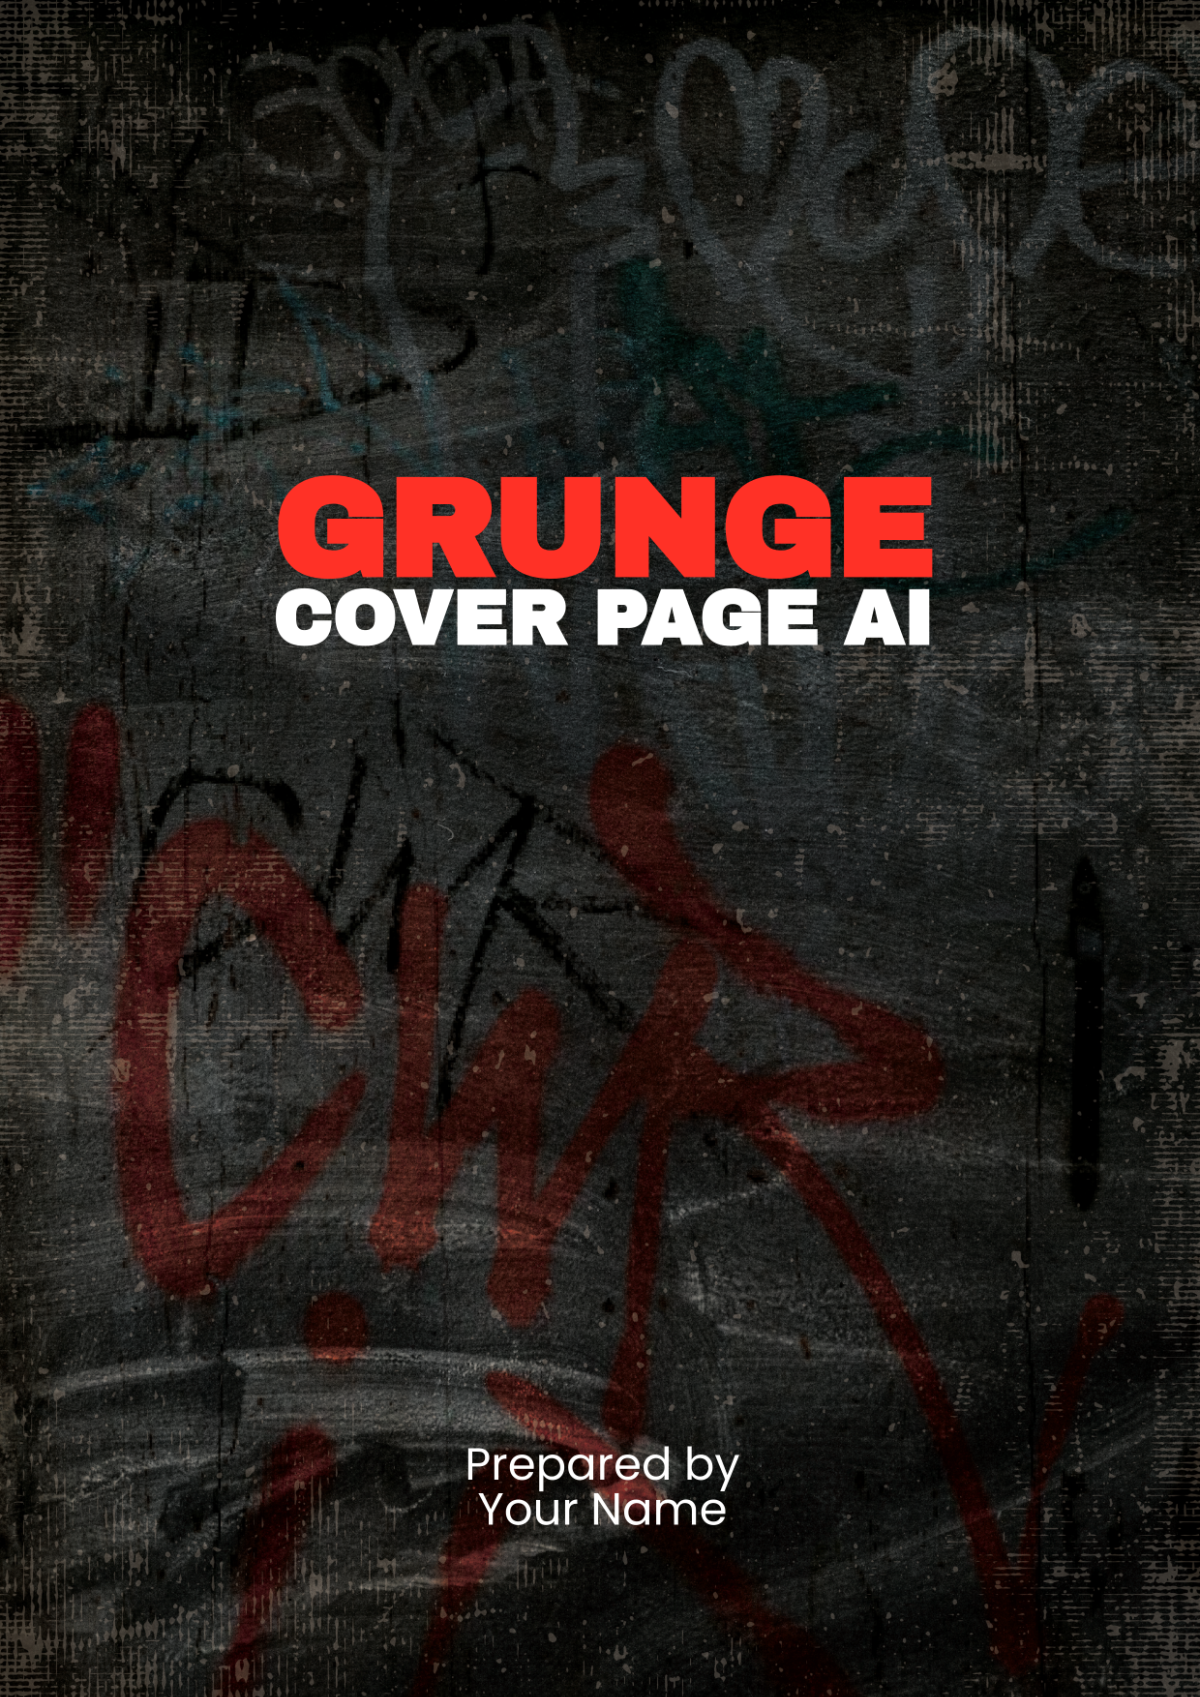 Grunge Cover Page AI Template